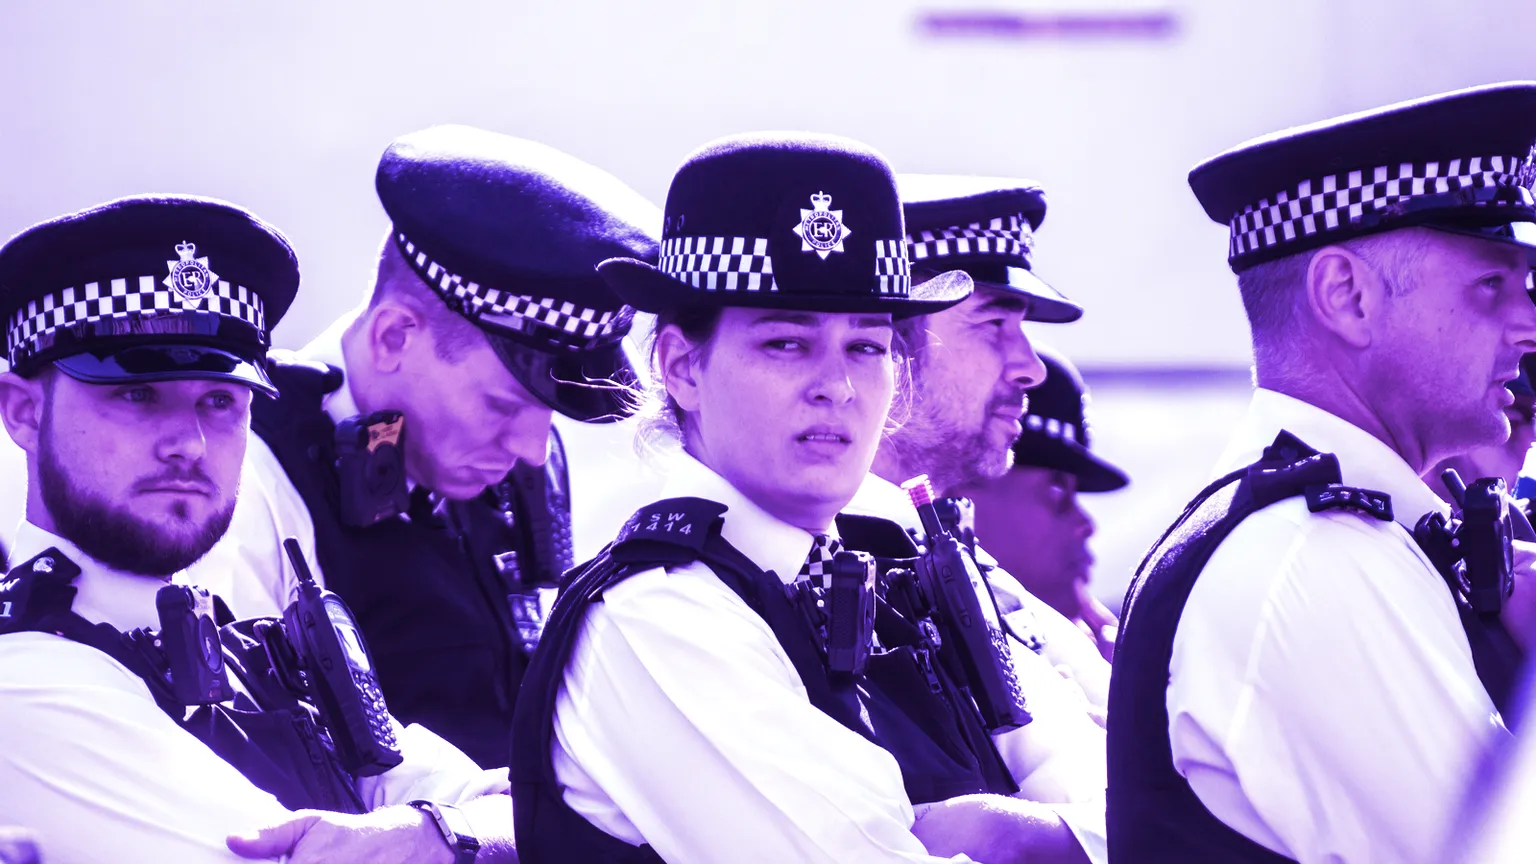 The London Metropolitan Police are responsible for law enforcement in the city's 32 boroughs. Image: Shutterstock